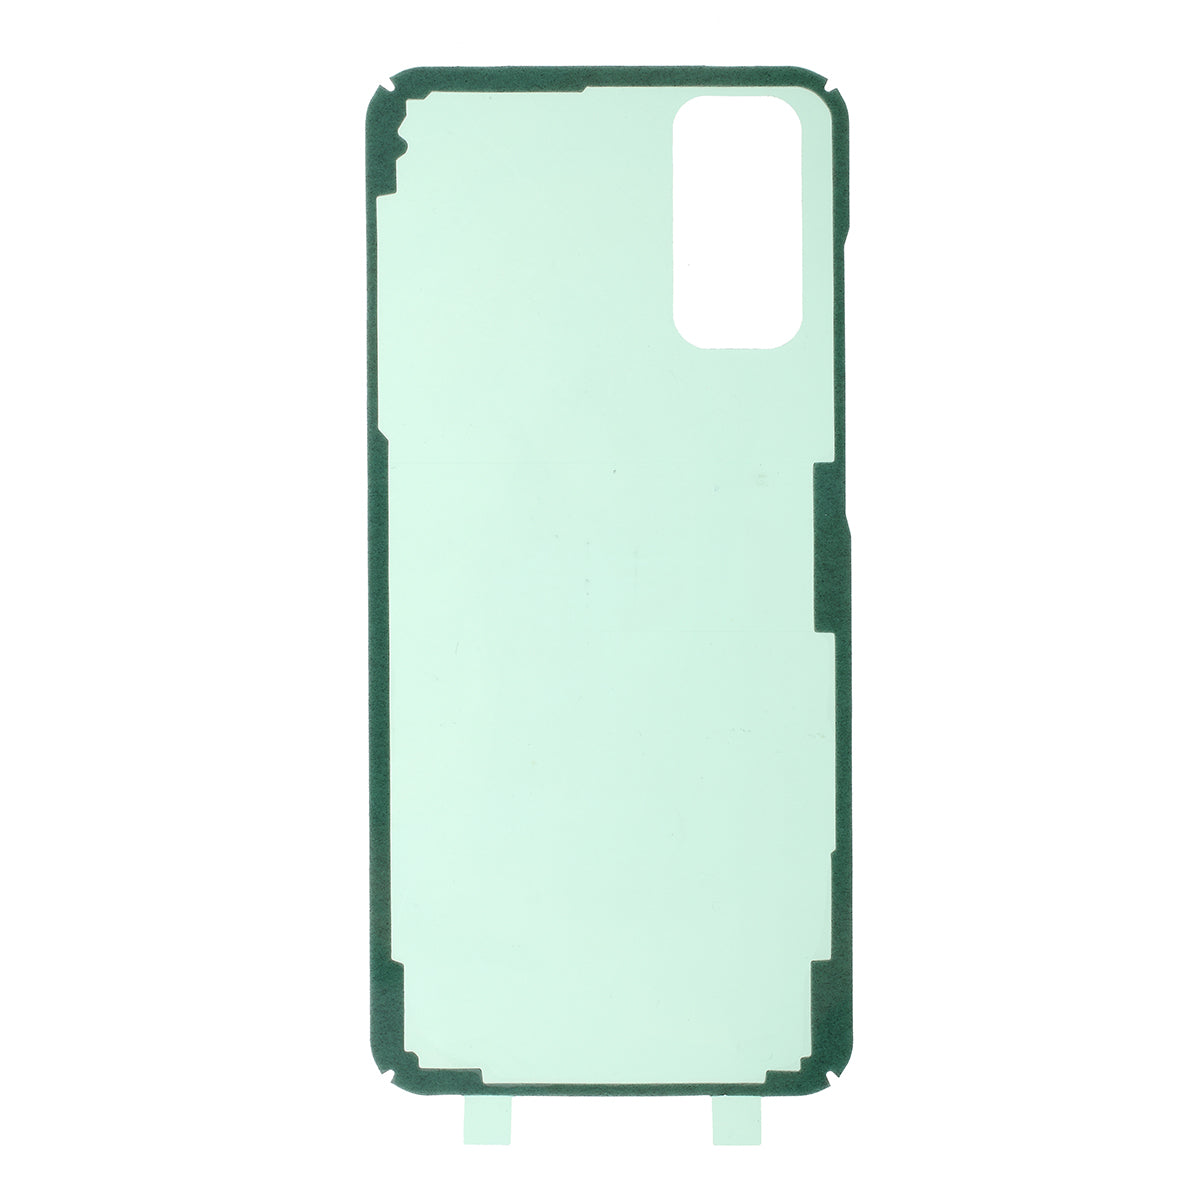 OEM Battery Back Door Adhesive Sticker for Samsung Galaxy S20 G980